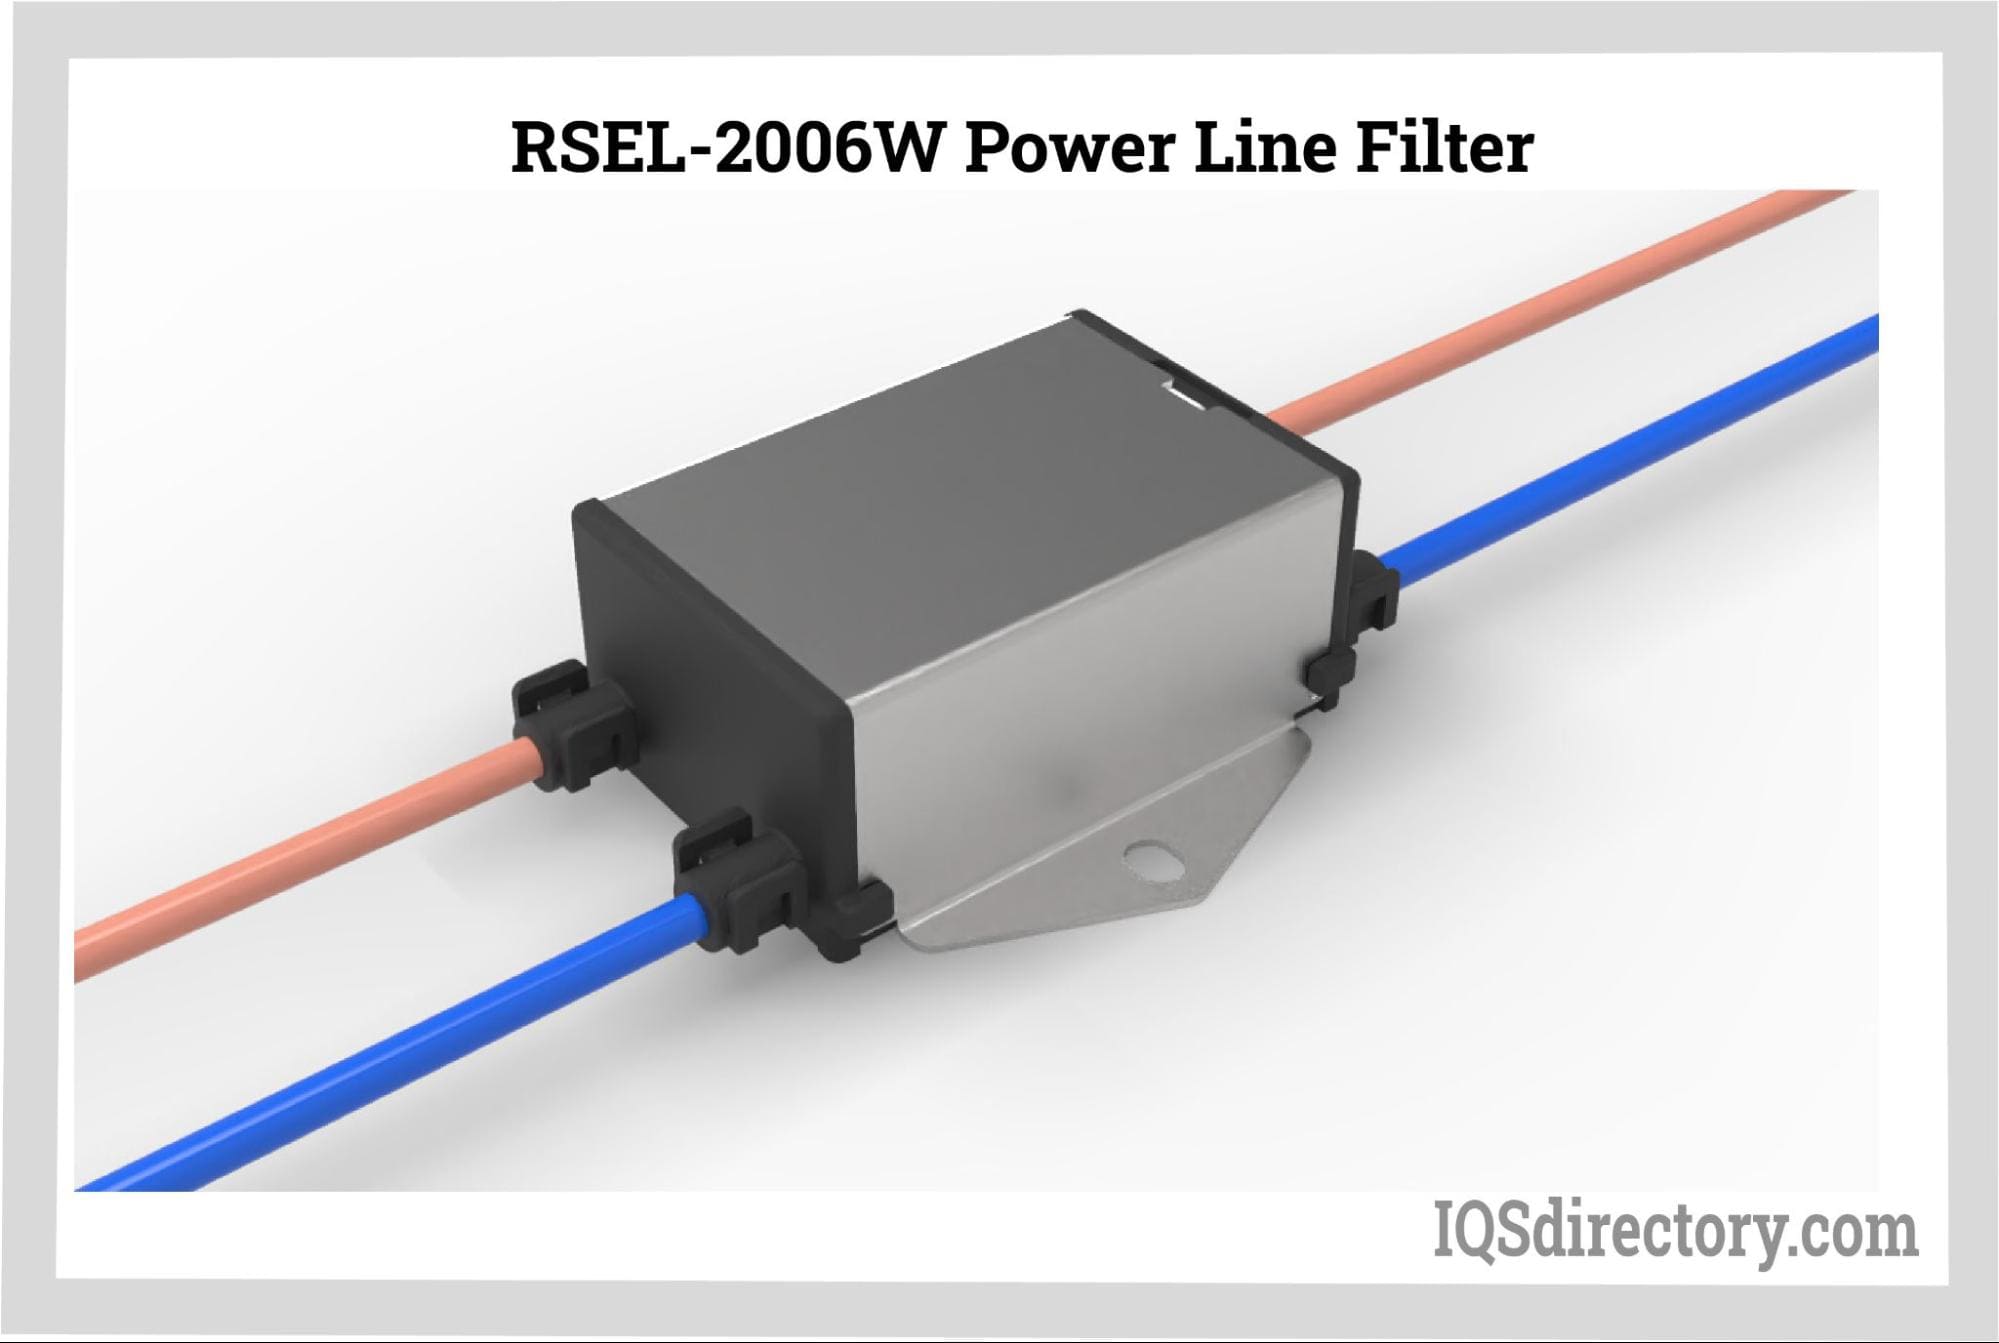 RSEL-2006W Power Line Filter